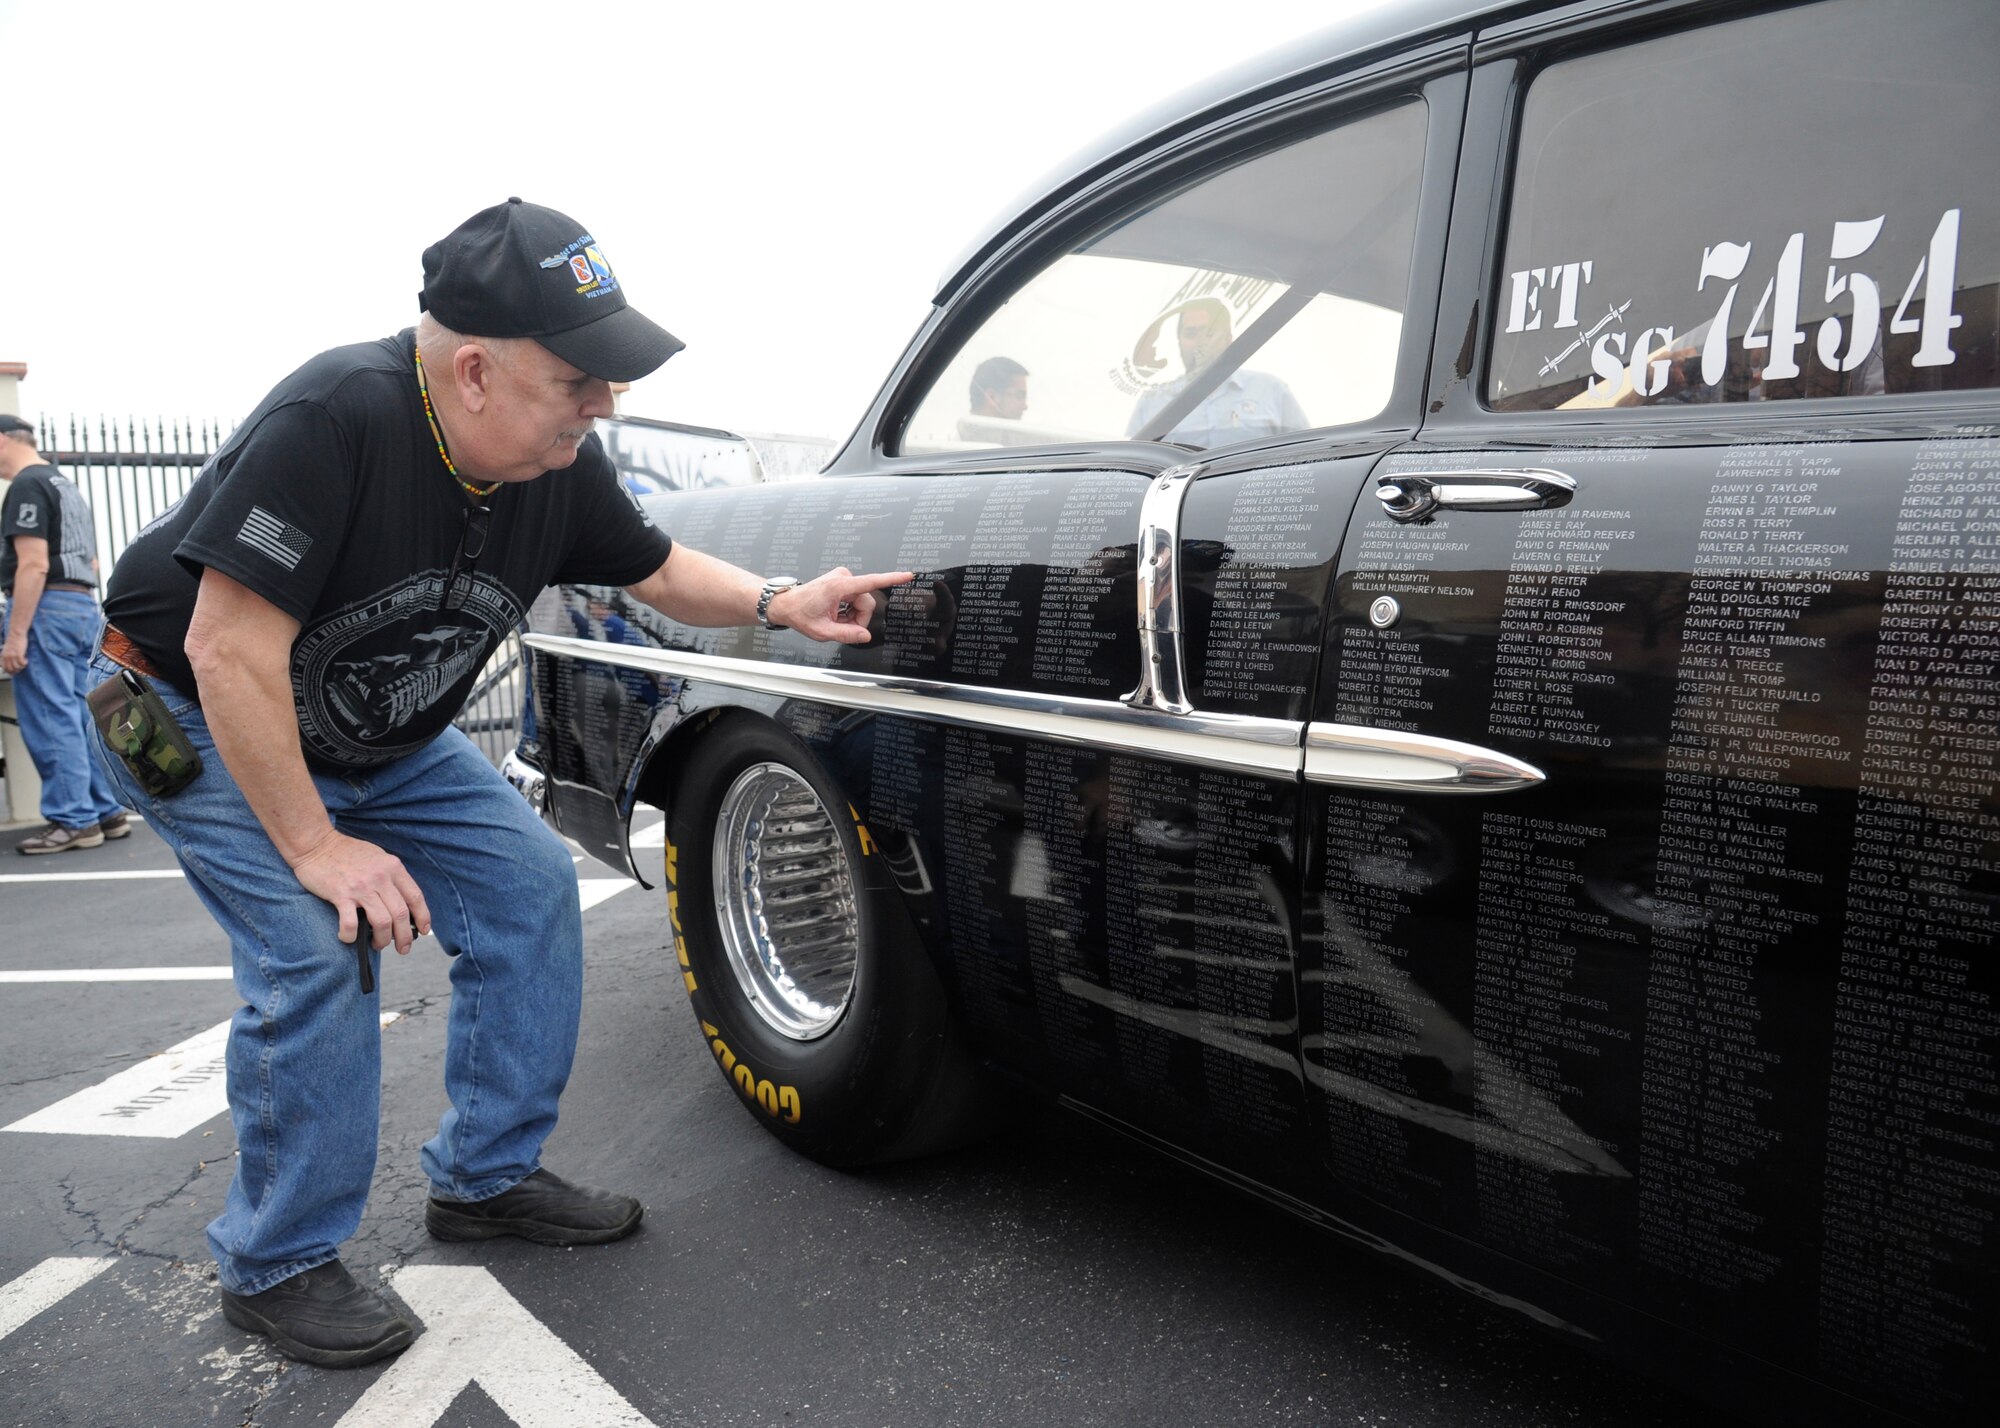 Phillip Jones, Vietnam combat infantry soldier, takes a closer look at the names on the POW MIA vehicle during the 42nd Freedom Flyer Reunion at Joint Base San Antonio-Randolph March 20. The events honor all POWs held captive during the Vietnam War. The tradition began when members of the 560th Flying Training Squadron were given the task to retrain more than 150 POWs returning to flying status. To honor their return, their initial training included a “freedom flight.” The last group of POWs was released from captivity in North Vietnam March 1973. (U.S. Air Force Photo by Harold China)